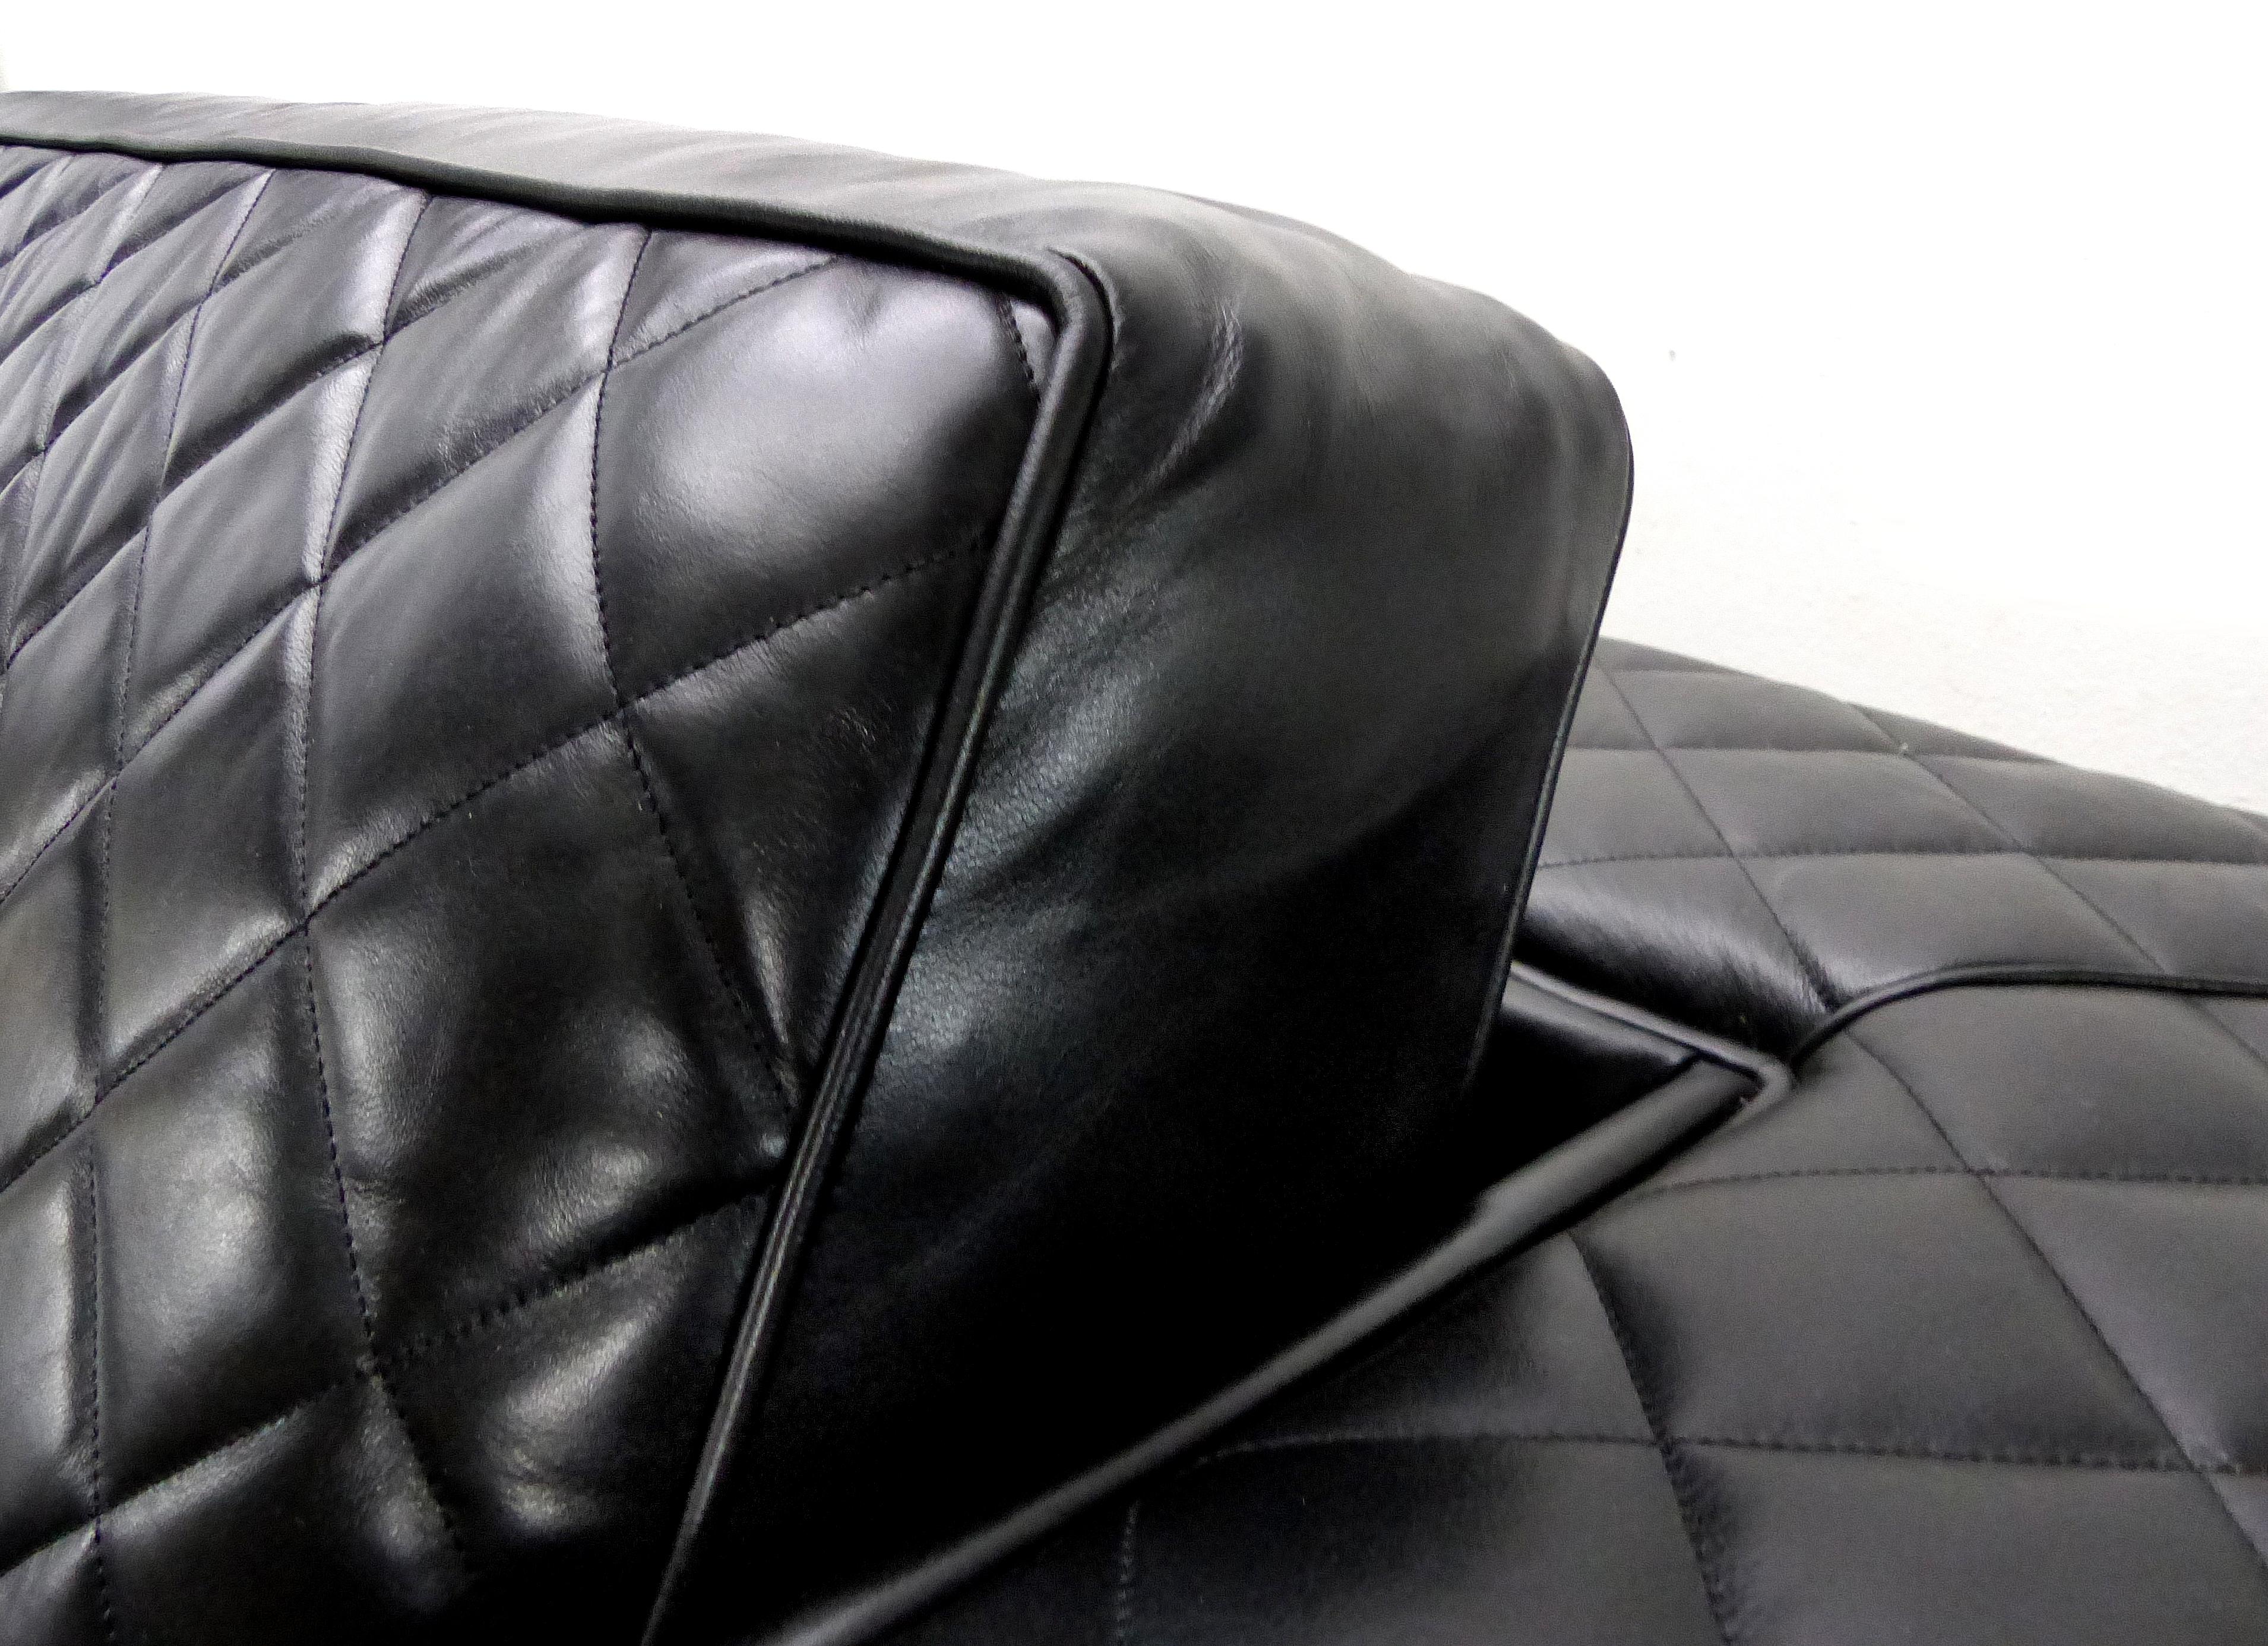 Embroidered  Zanaboni Italy Quilted Black Leather Sofa, Loose Quilted Back and Seat Cushion For Sale